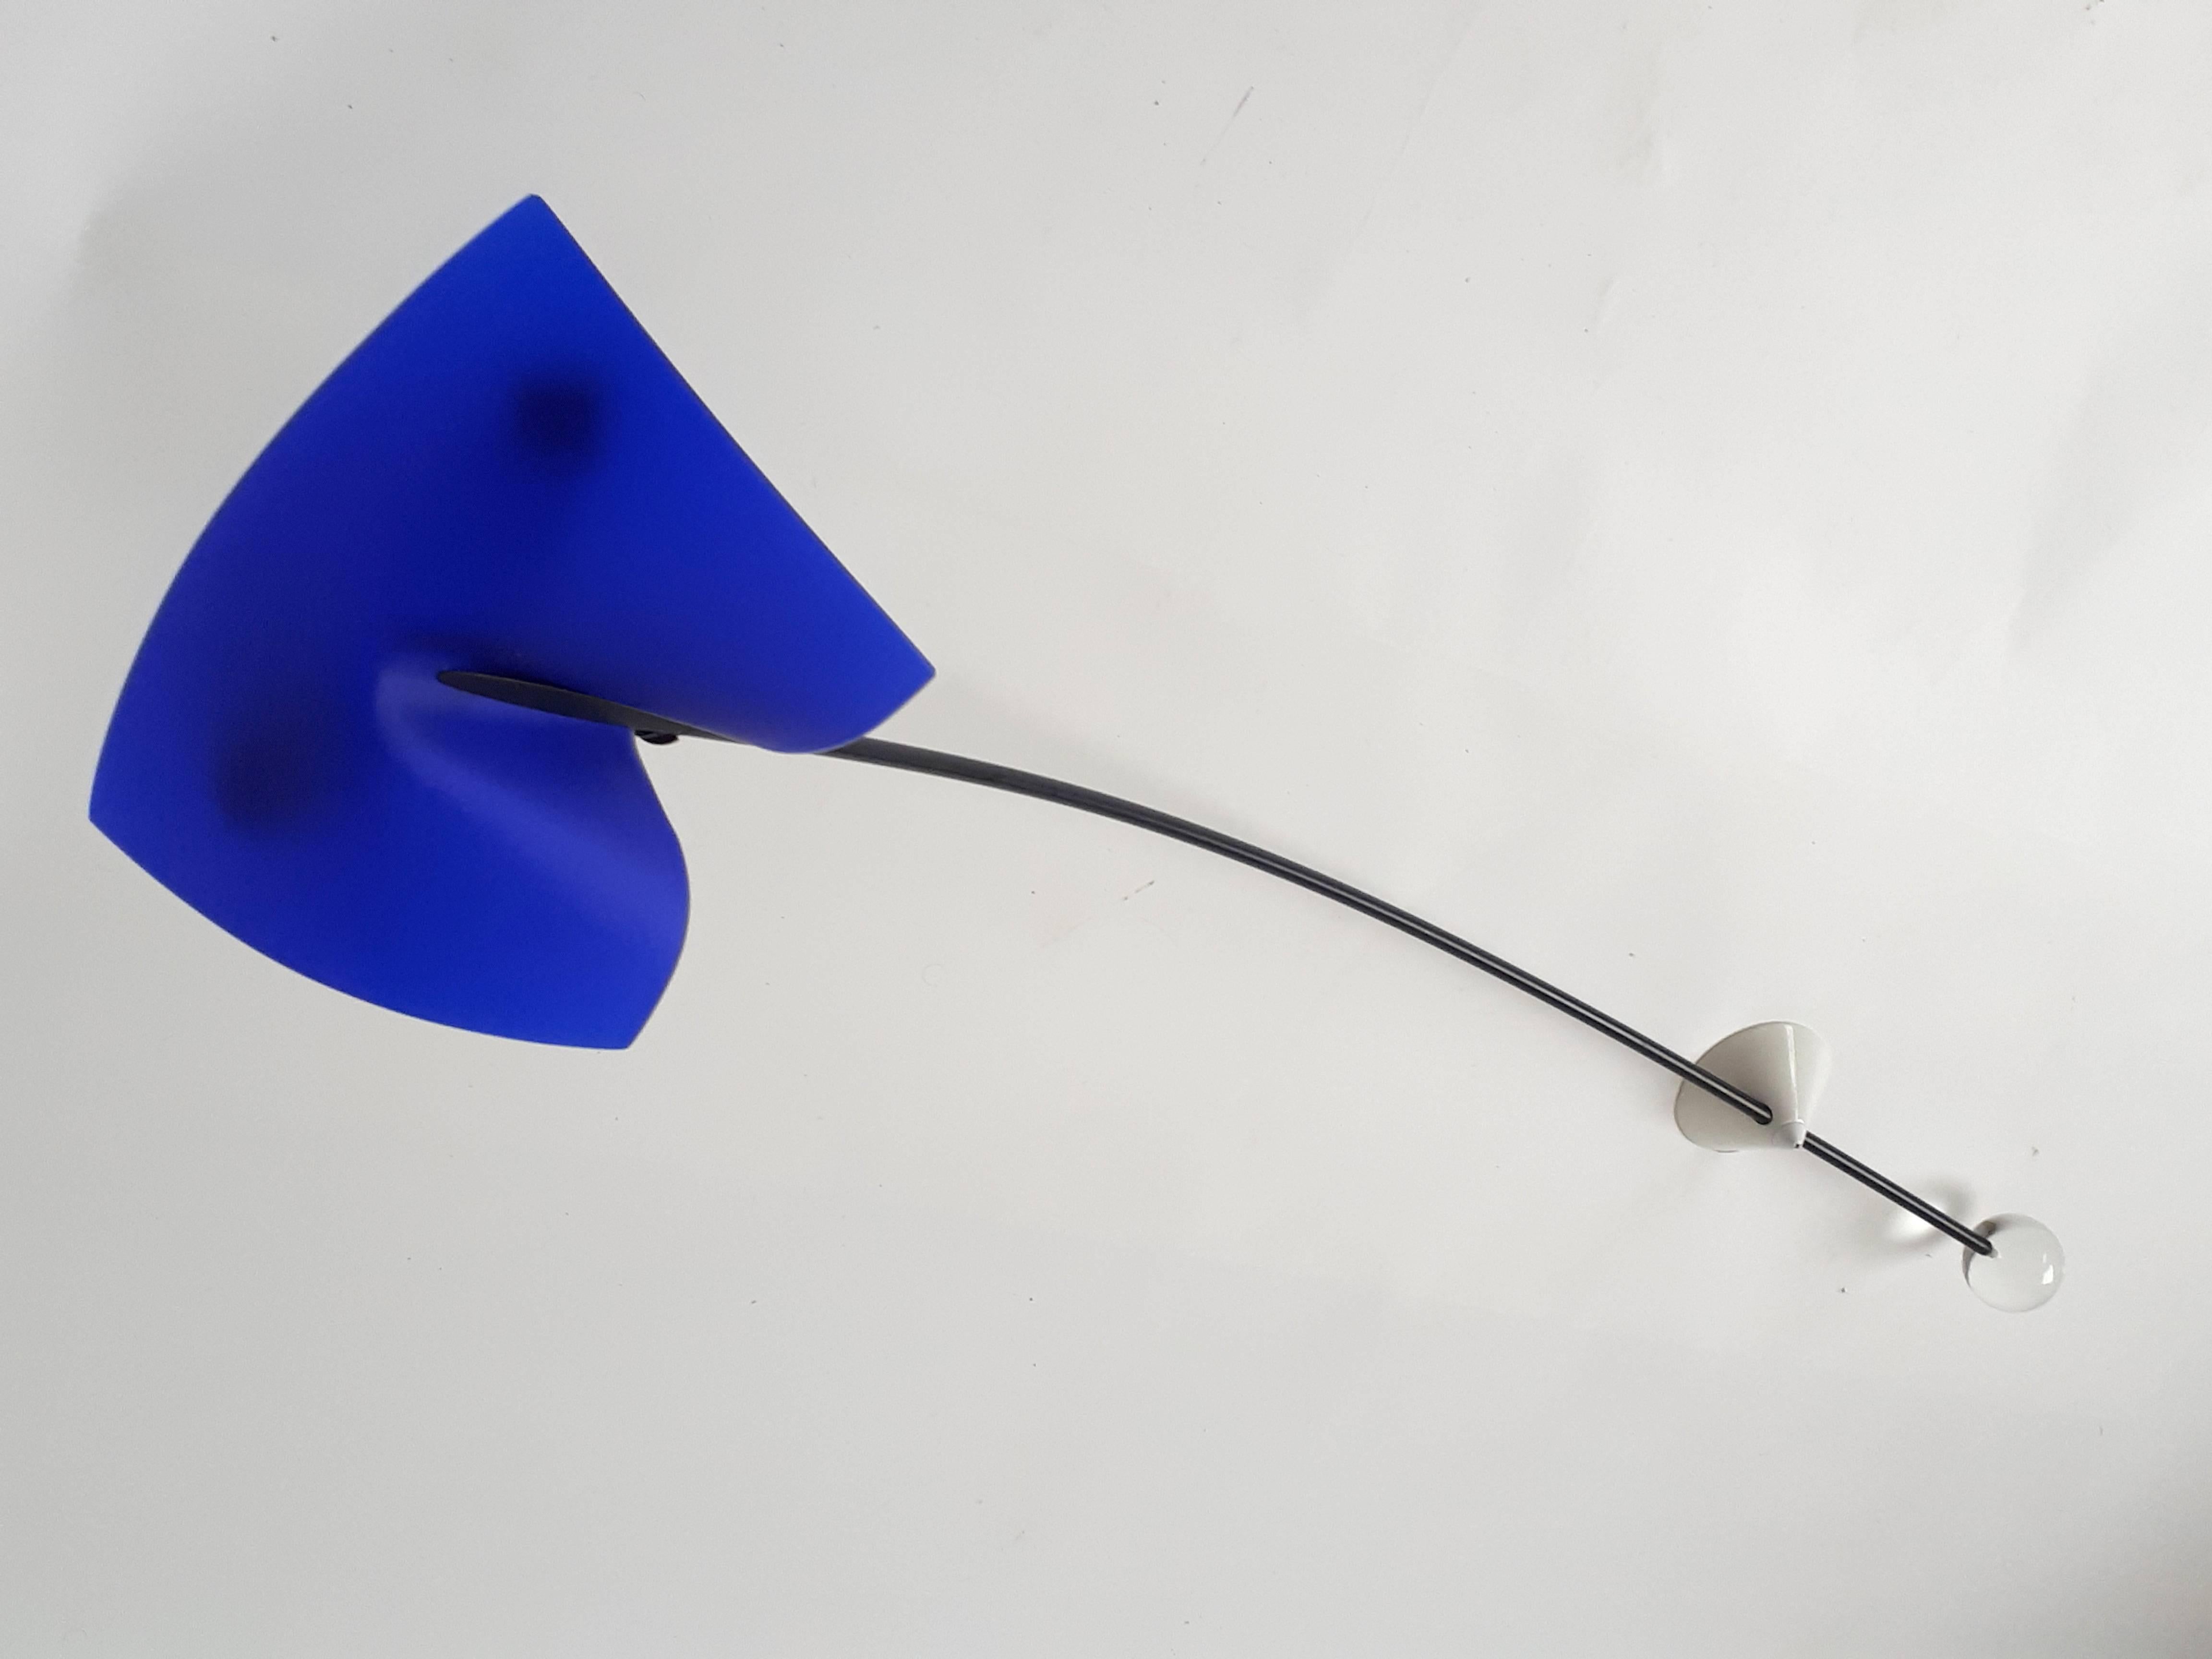 Rare lighting art piece from the Foscarini 'Ricerca' serie in a cobalt blue tone 

This is the longer version. It measure 51 inches long.

Solid matching glass ball counterweight in translucid blue (not clear).

Well made with prime quality